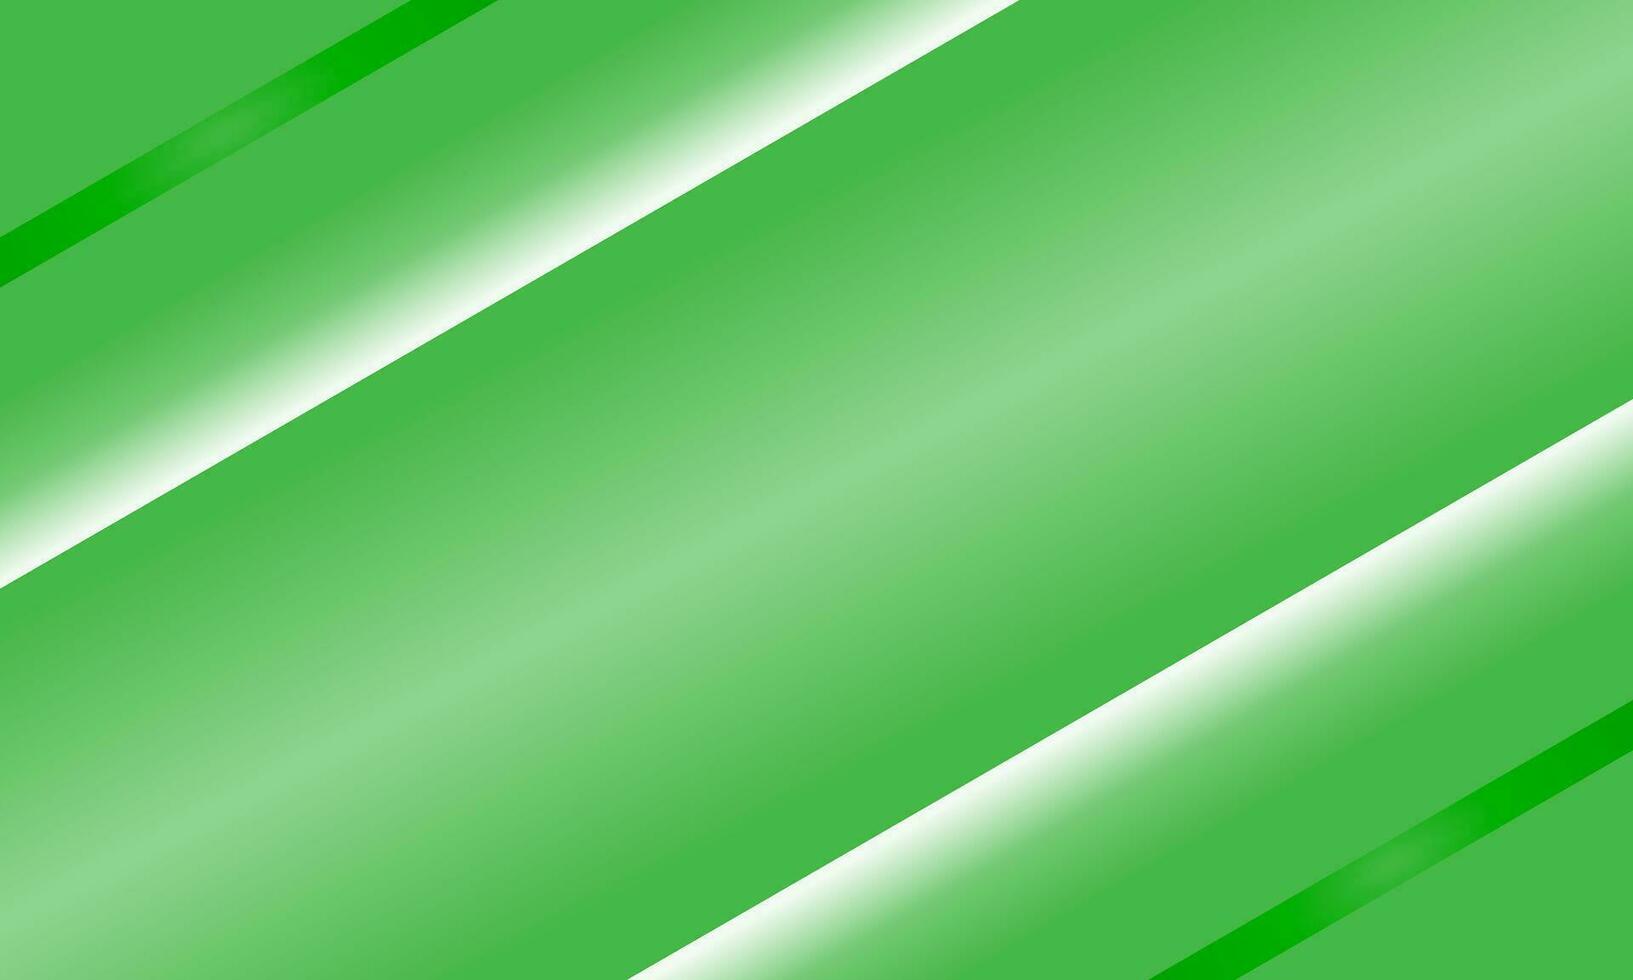 Green banner with diagonal stripes pattern vector